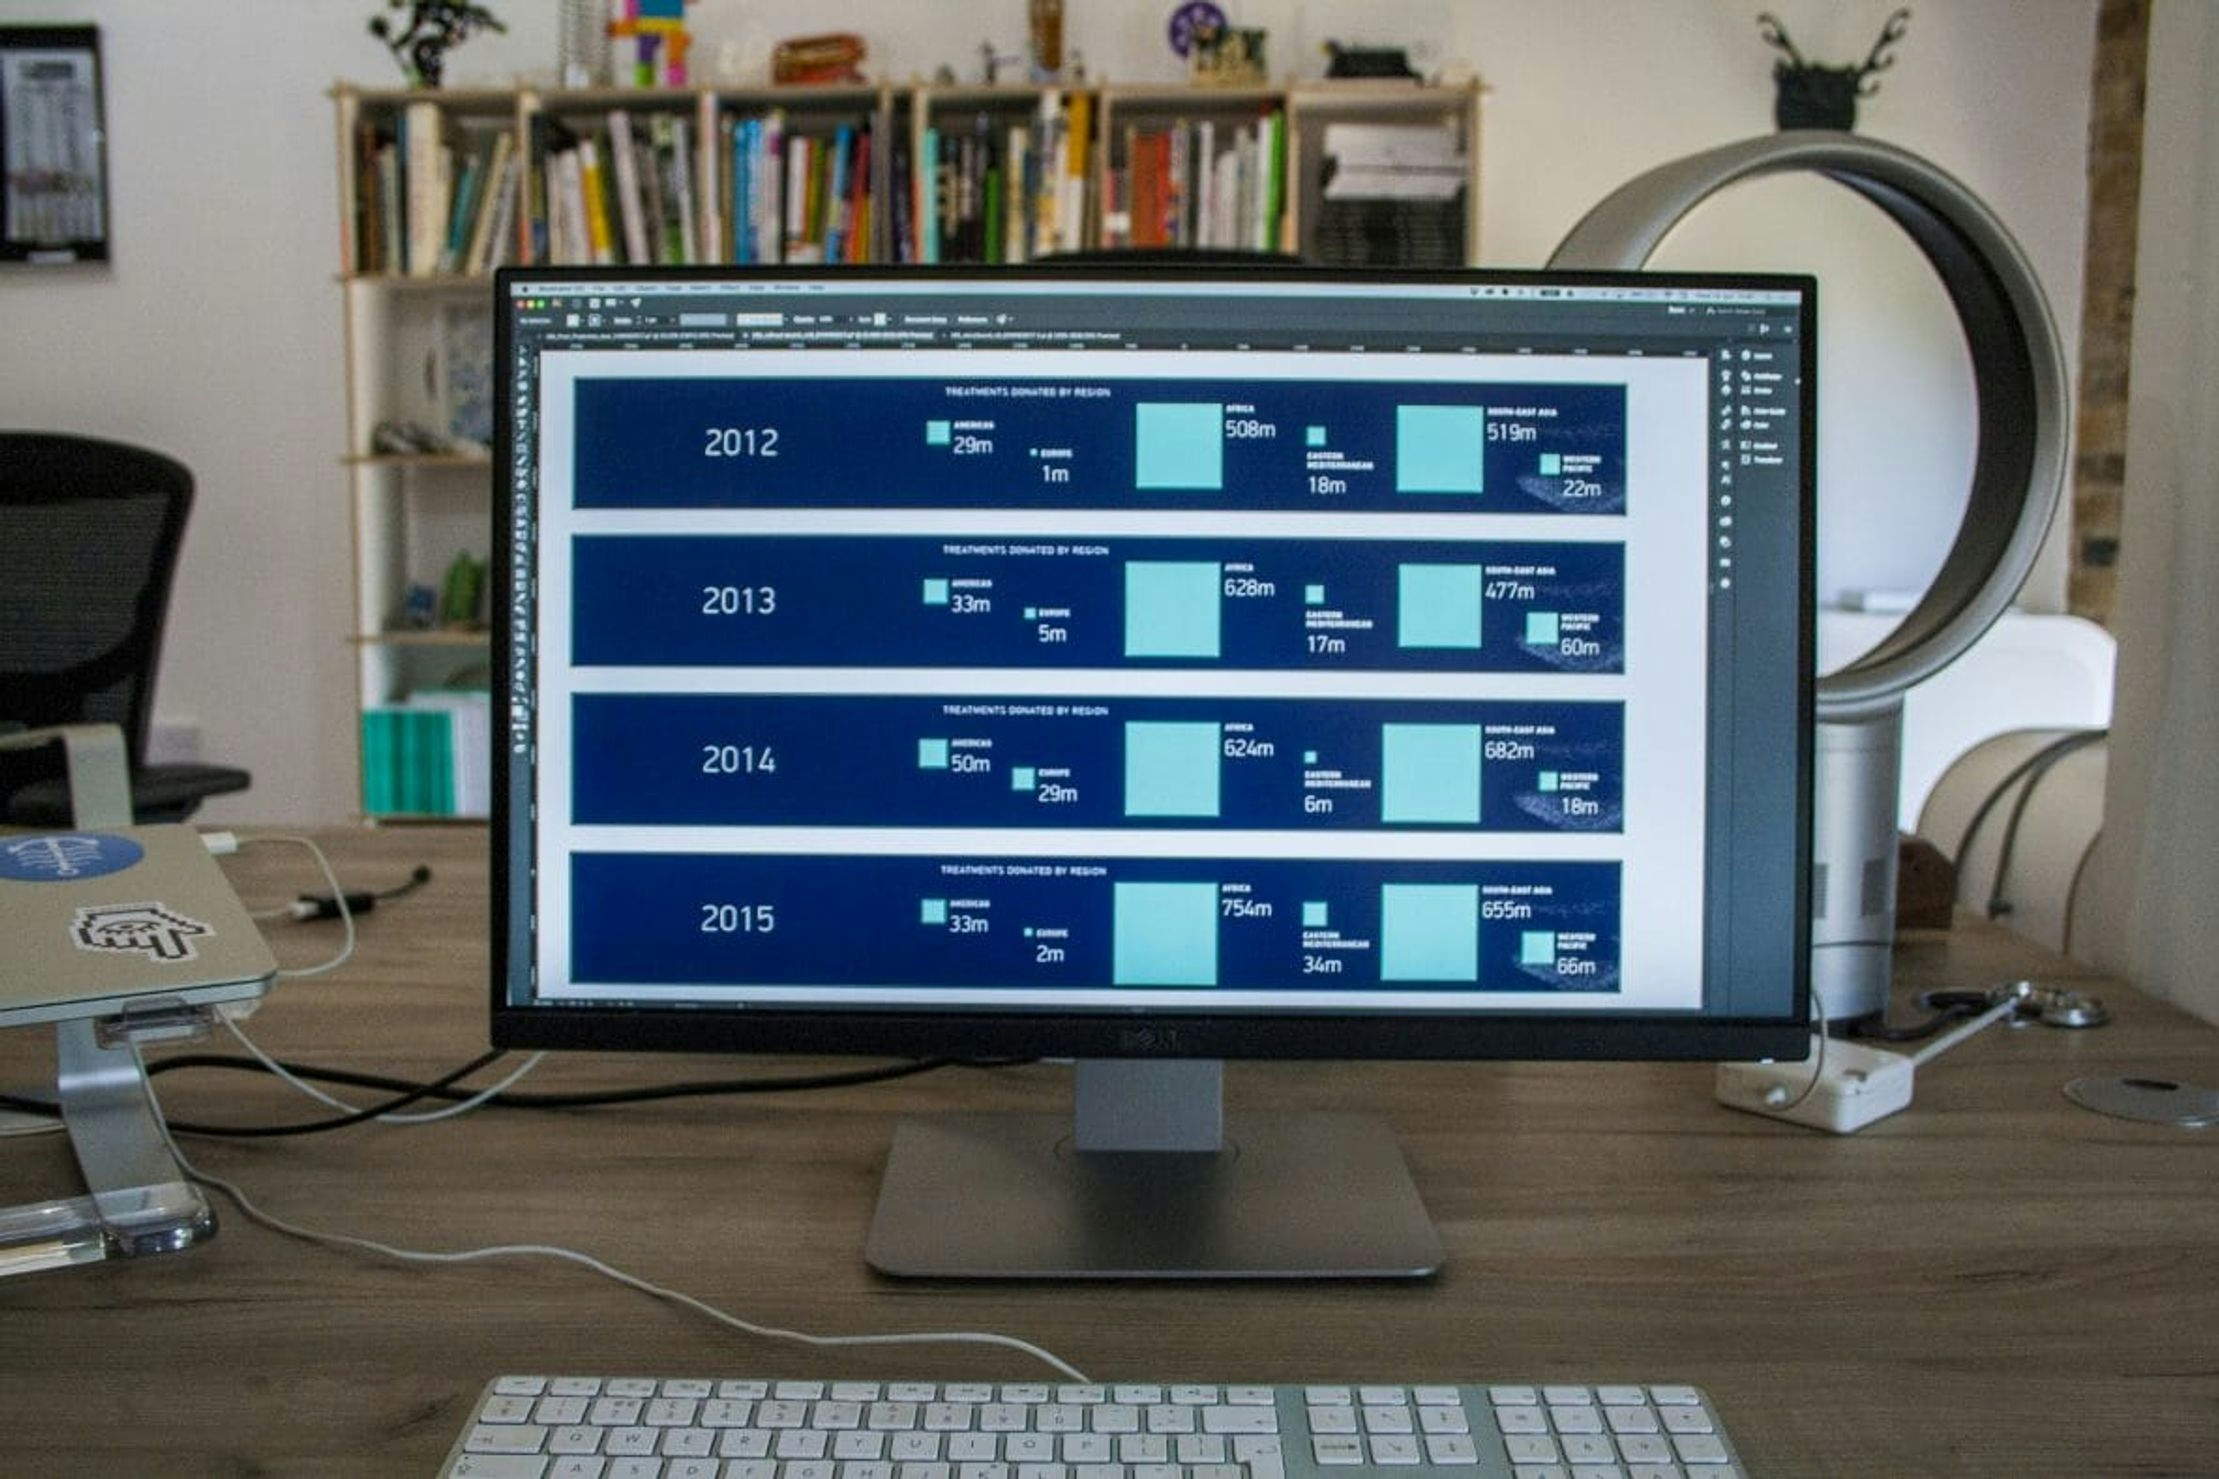 A computer screen on a desk. The screen shows four data visualizations for the years 2012 to 2015.